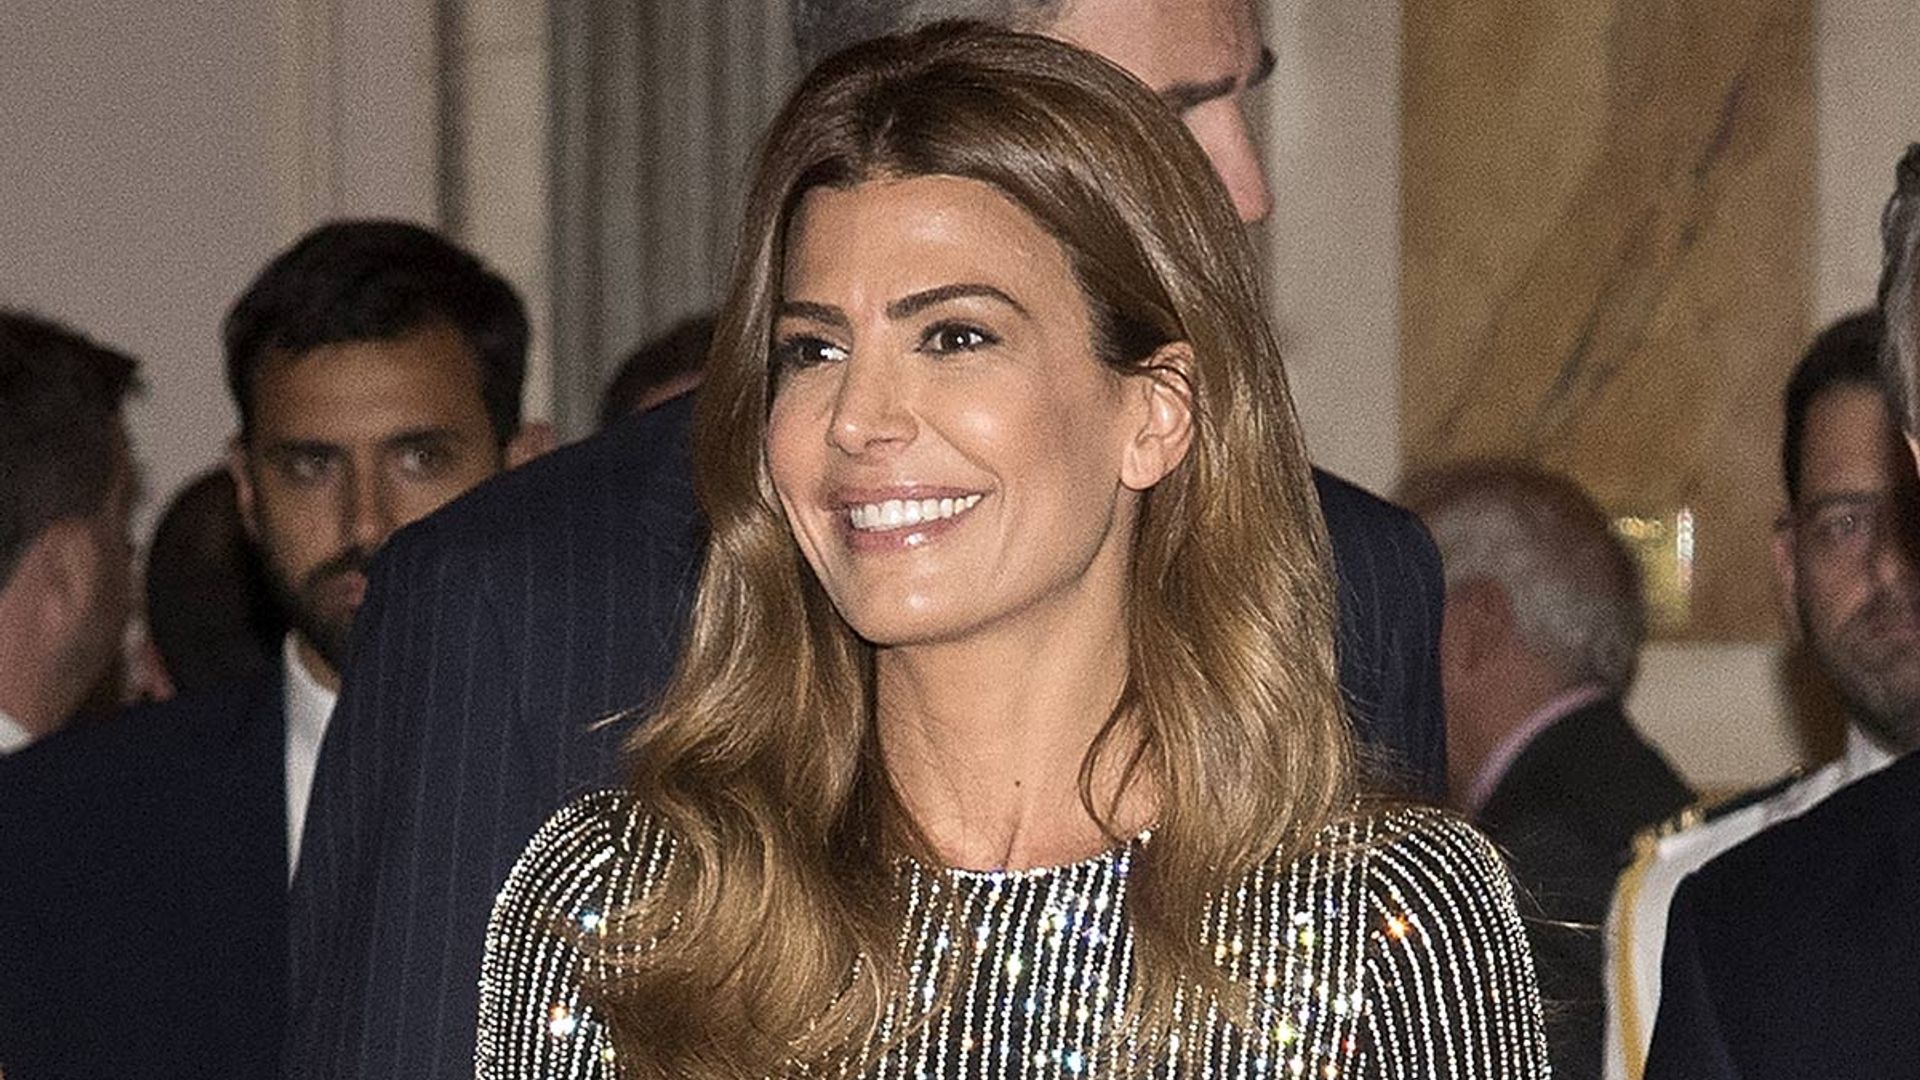 Argentina's First Lady Juliana Awada is a vision in silver sequins – all the details on Queen Letizia's stylish friend